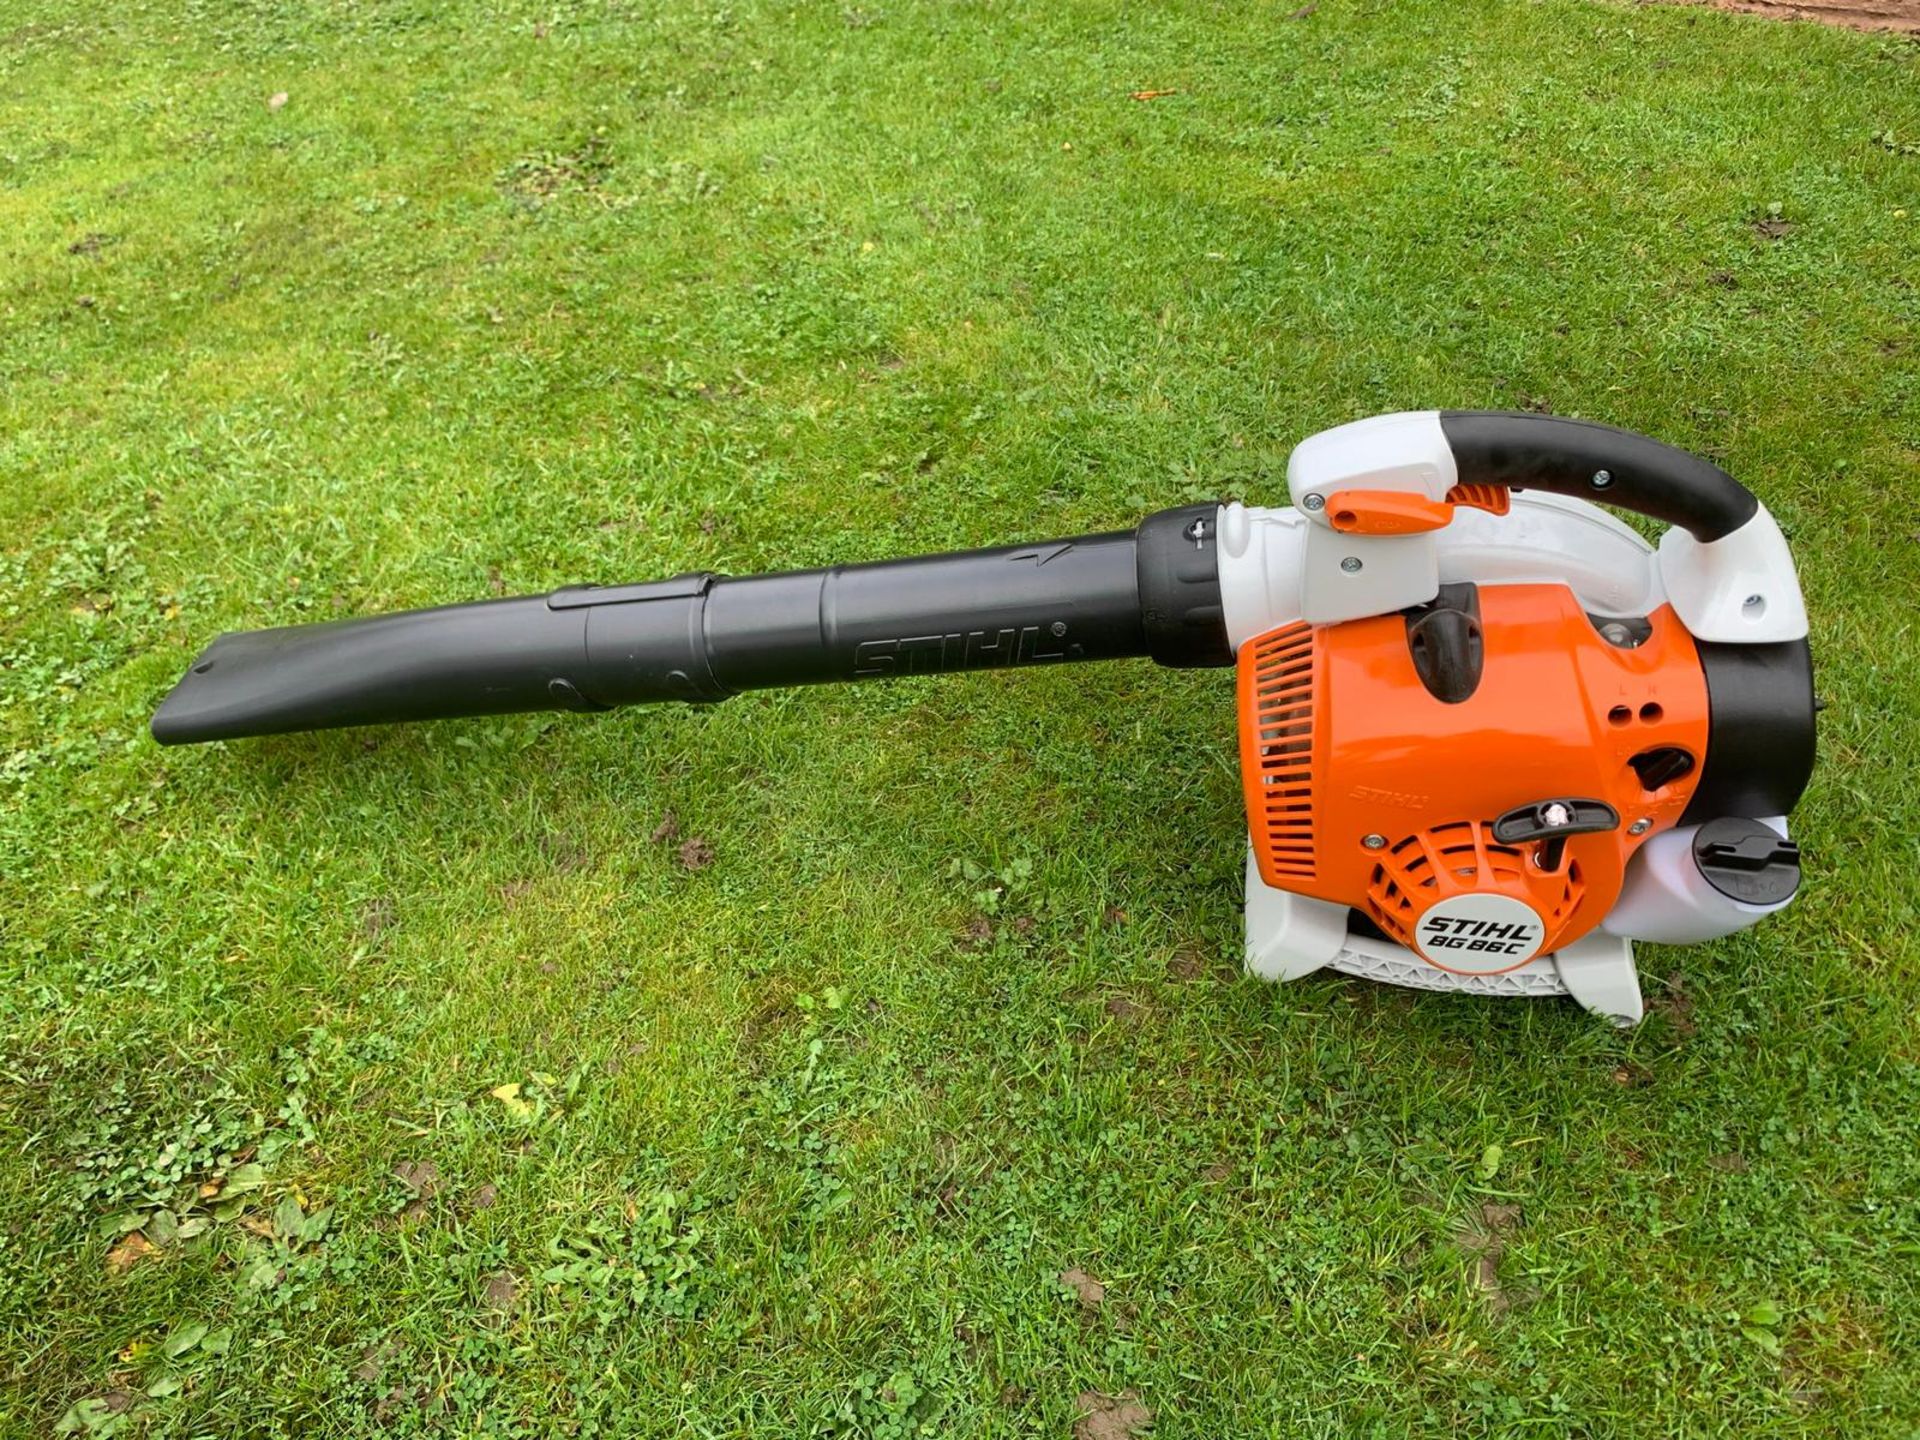 BRAND NEW AND UNUSED STIHL BG86C-3 LEAF BLOWER, C/W MANUAL AND PIPES (BOXED) *NO VAT* - Image 3 of 3